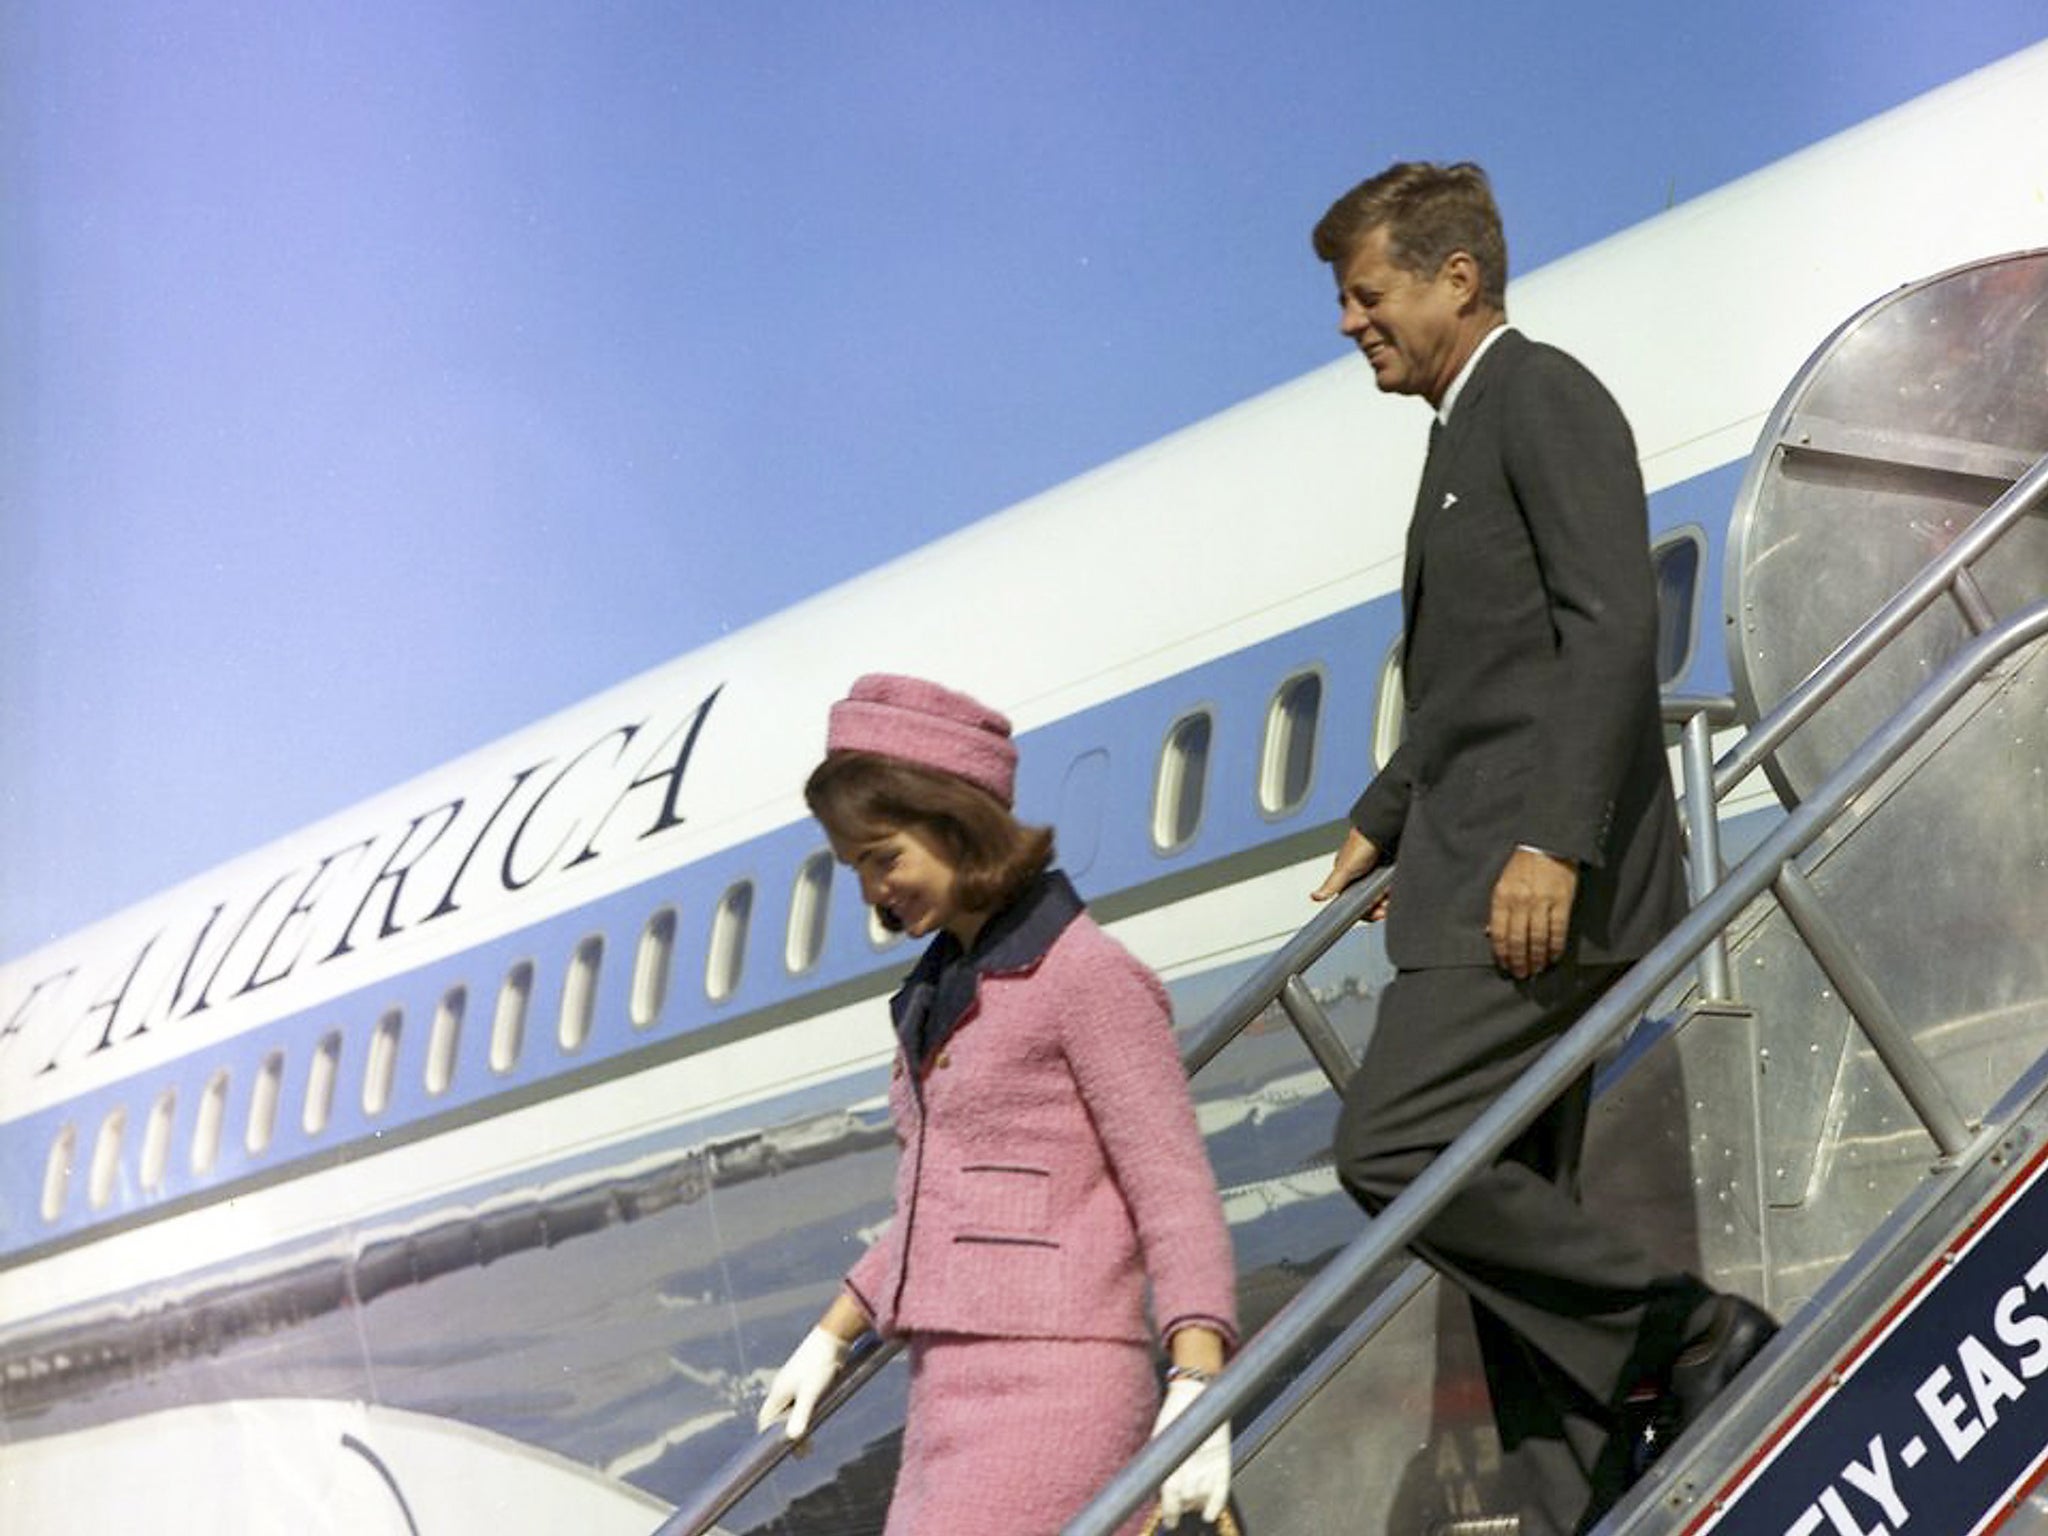 The Kennedys arrive in Dallas, Texas, on 22 November 1963: the President was assassinated shortly afterwards